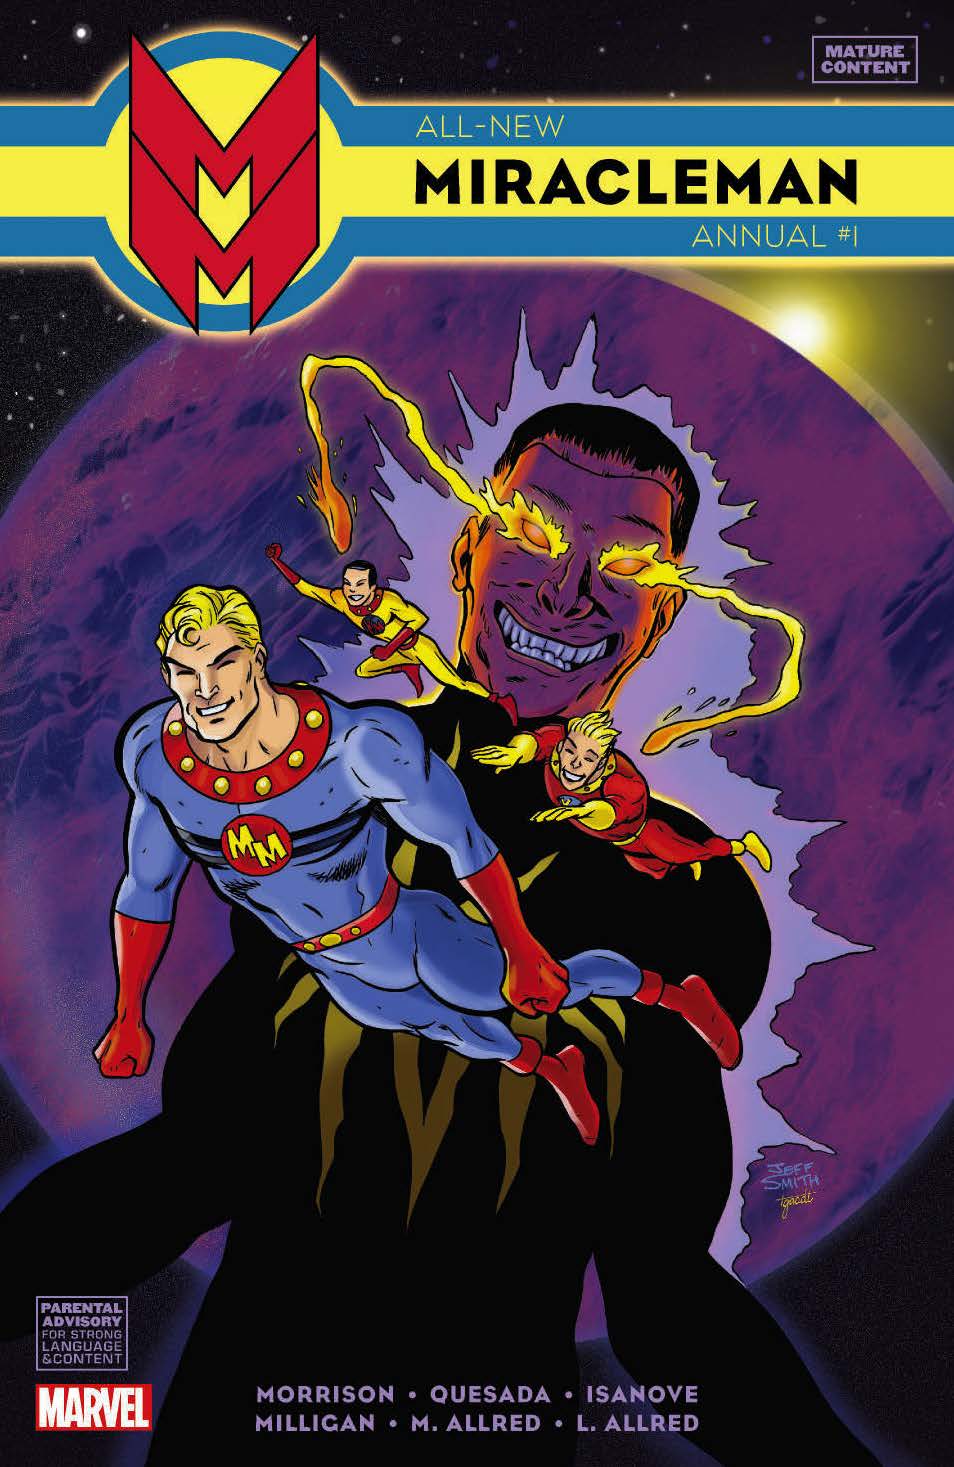 All-New Miracleman Annual (2014) #1 (Smith Variant)